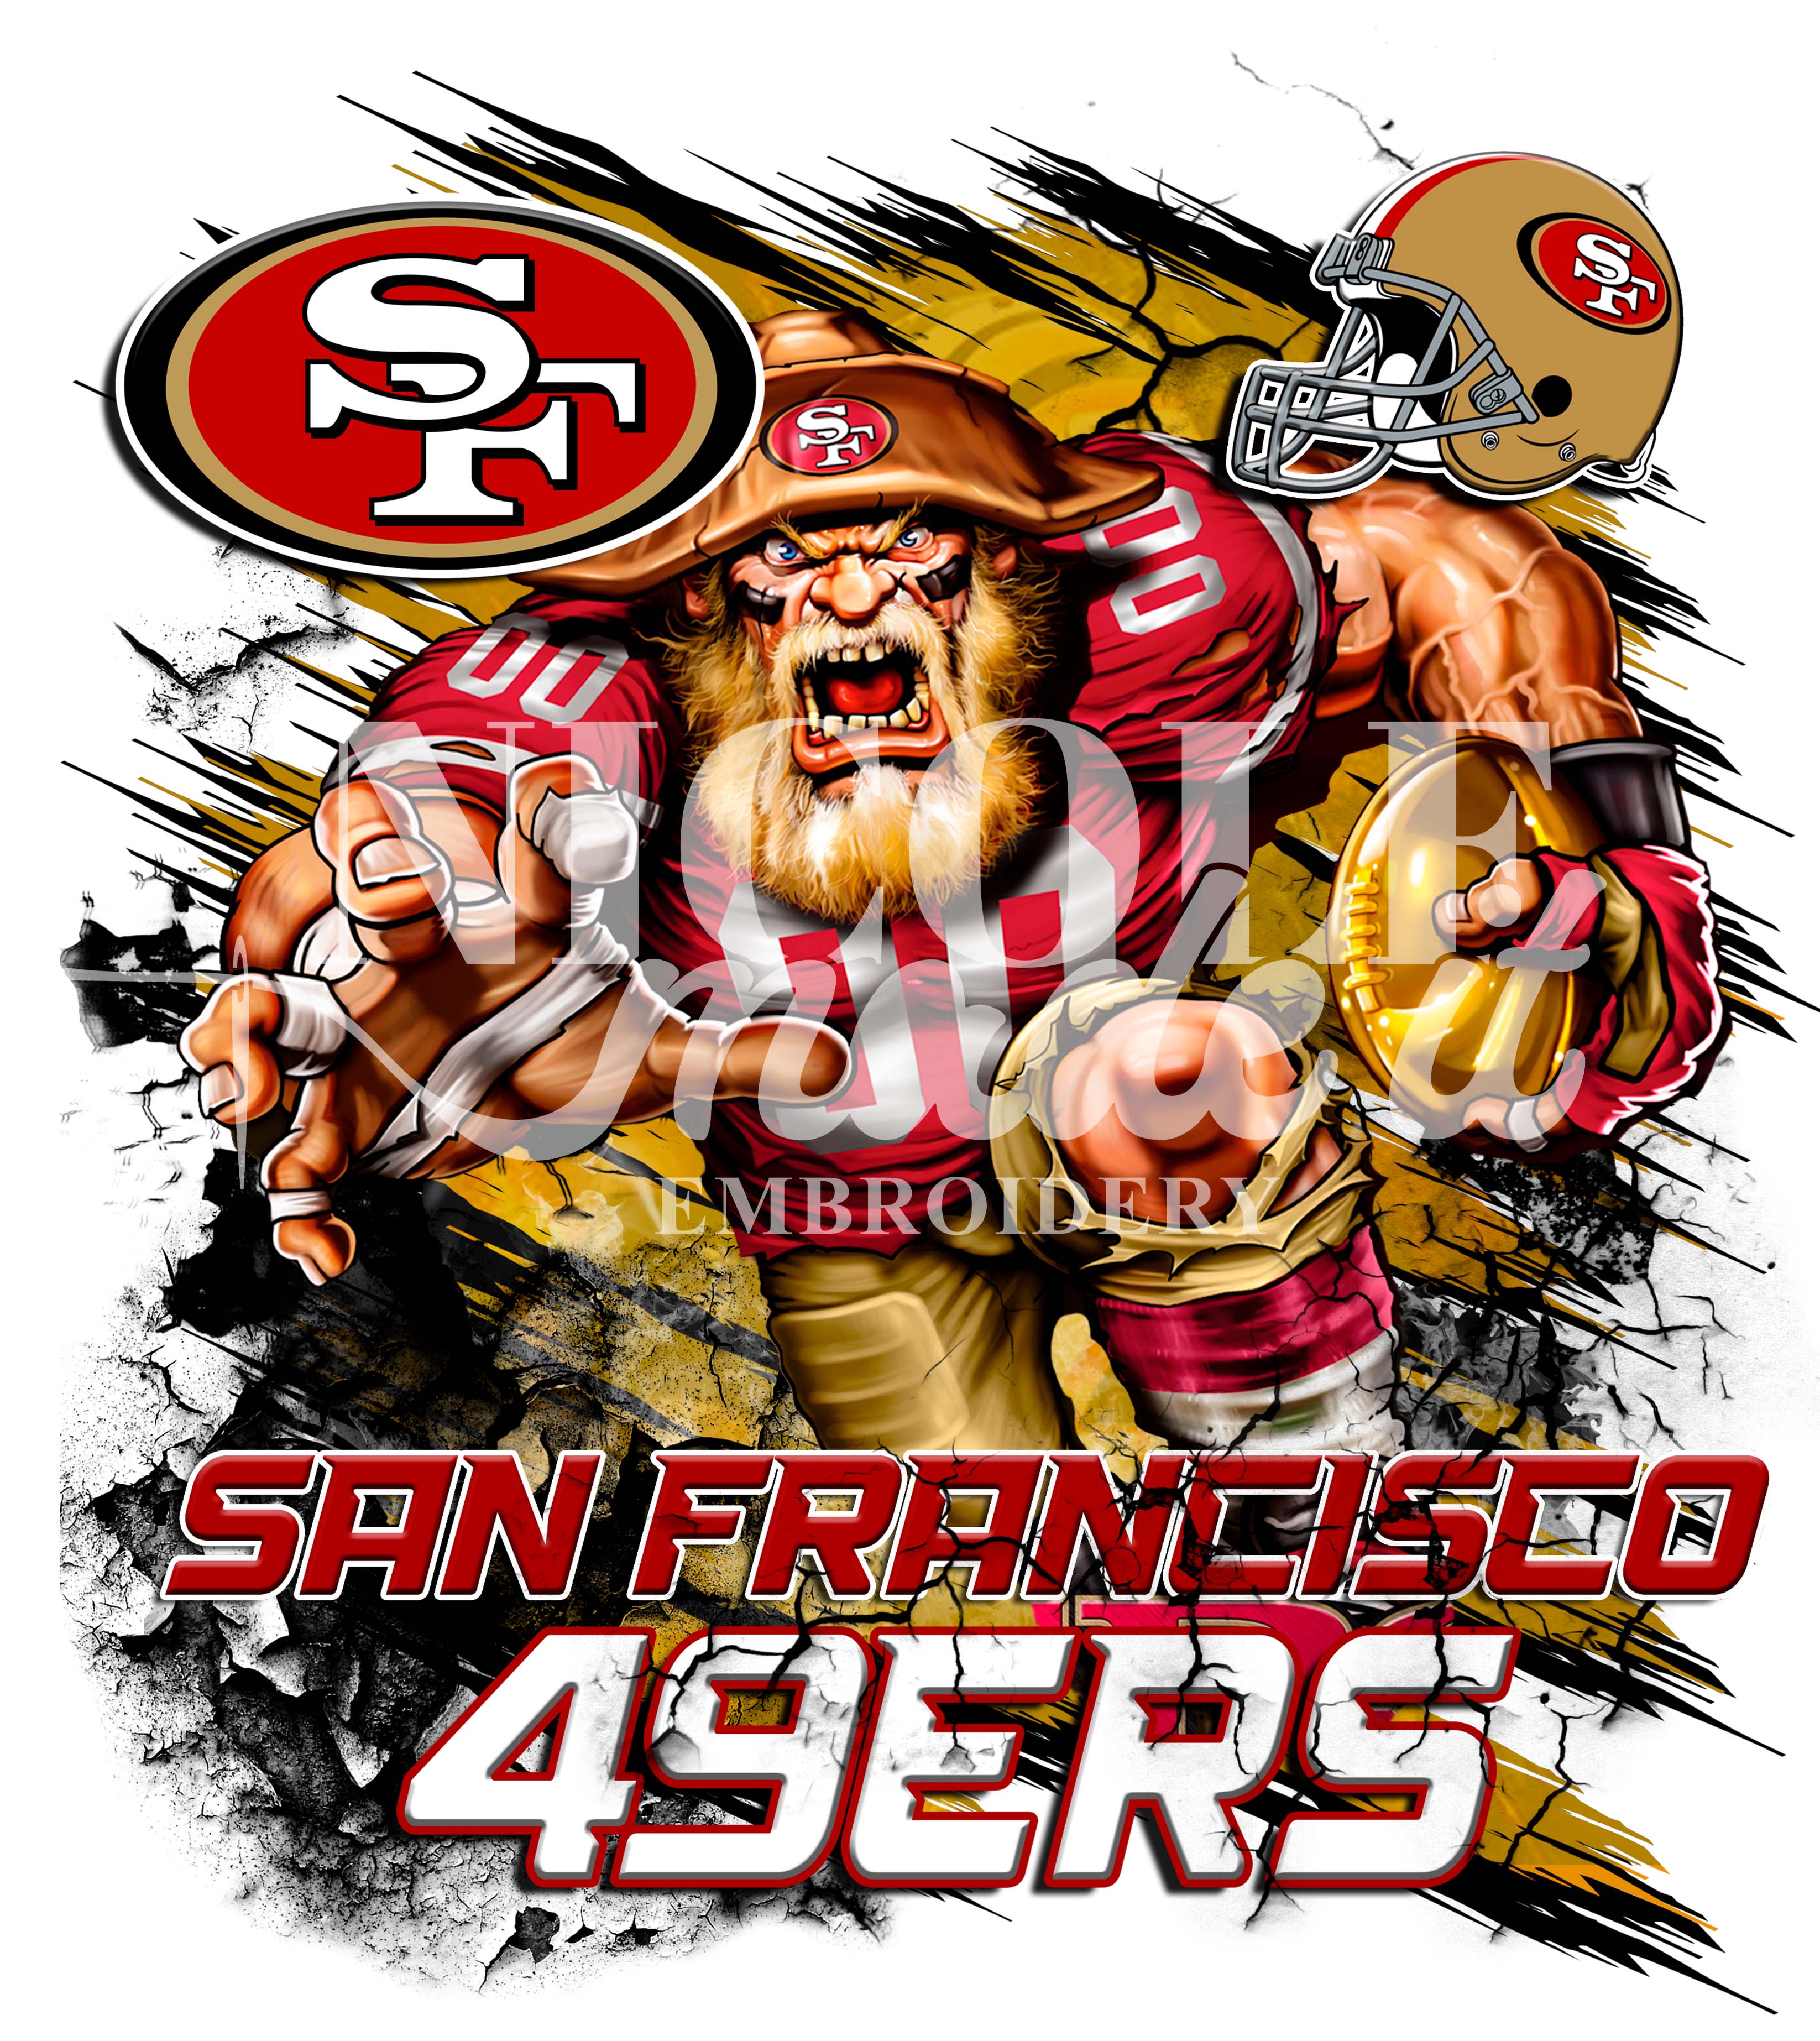 sf 49ers game day